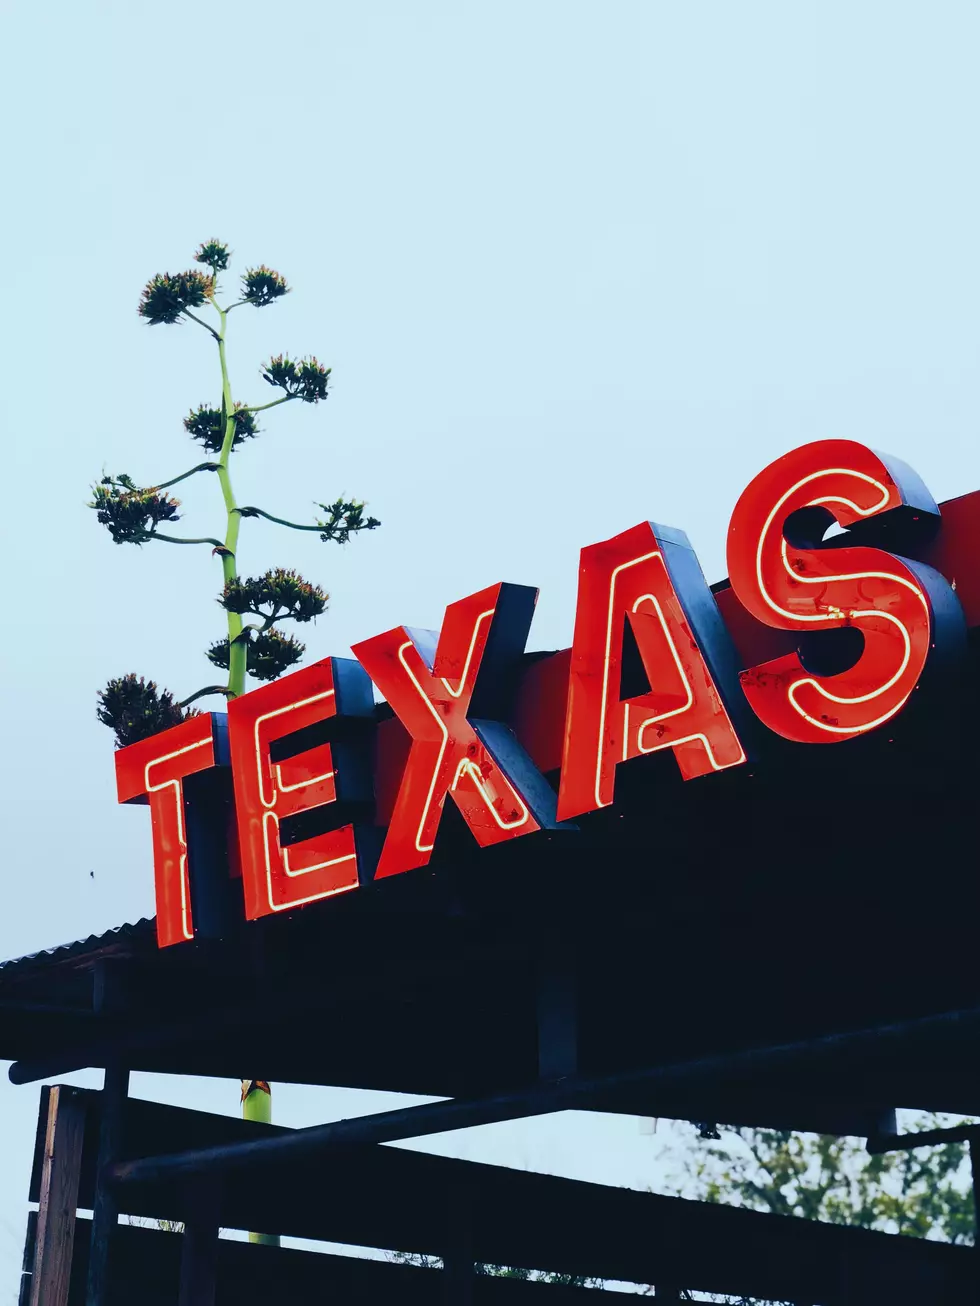 Considering A Permanent Move To Texas? Here Are 5 Reasons NOT To!